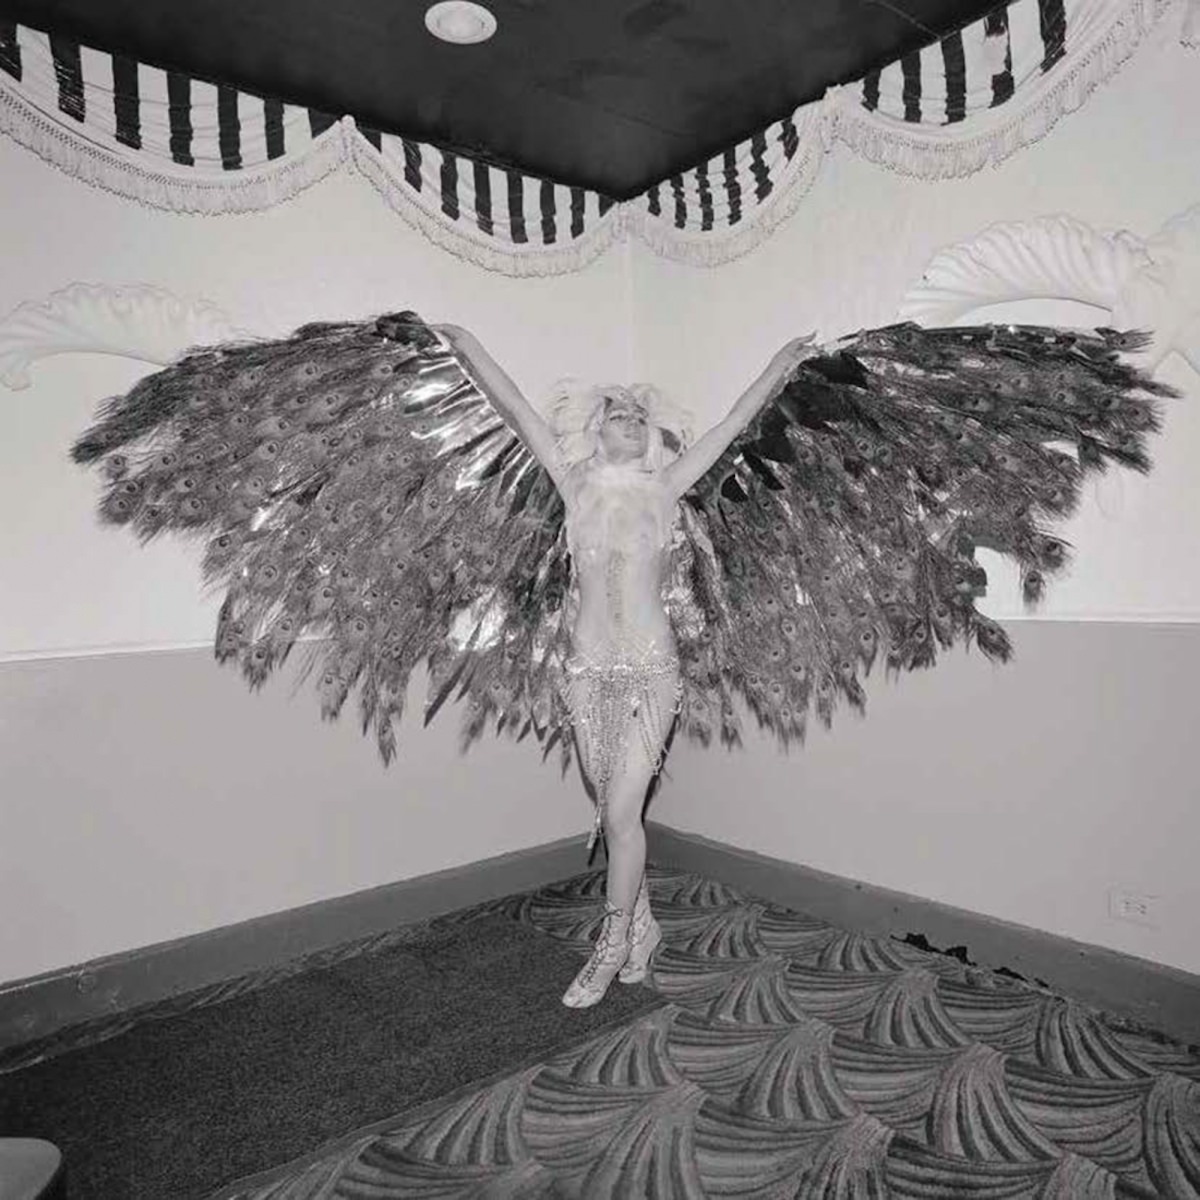 Spreading Wings At The Coyote Hookers Masquerade Ball, 1977